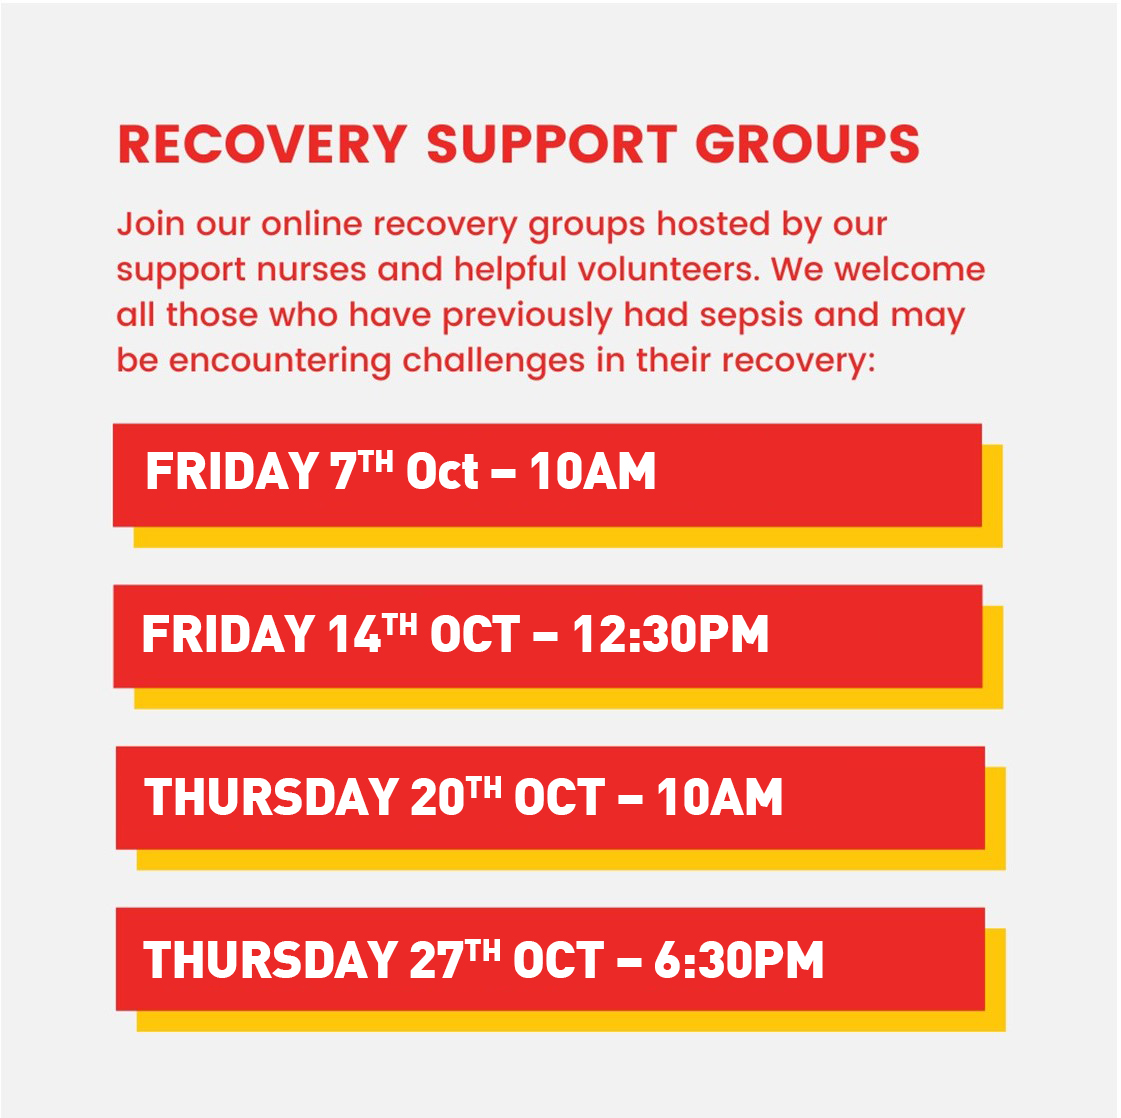 Have you been affected by #sepsis? Our support nurses are here to help. Join one of our weekly relaxed and informal Zoom sessions. We run separate facilitated groups for recovery and bereavement. Click for more information and dates: sepsistrust.org/get-support/su… #SepsisSupport